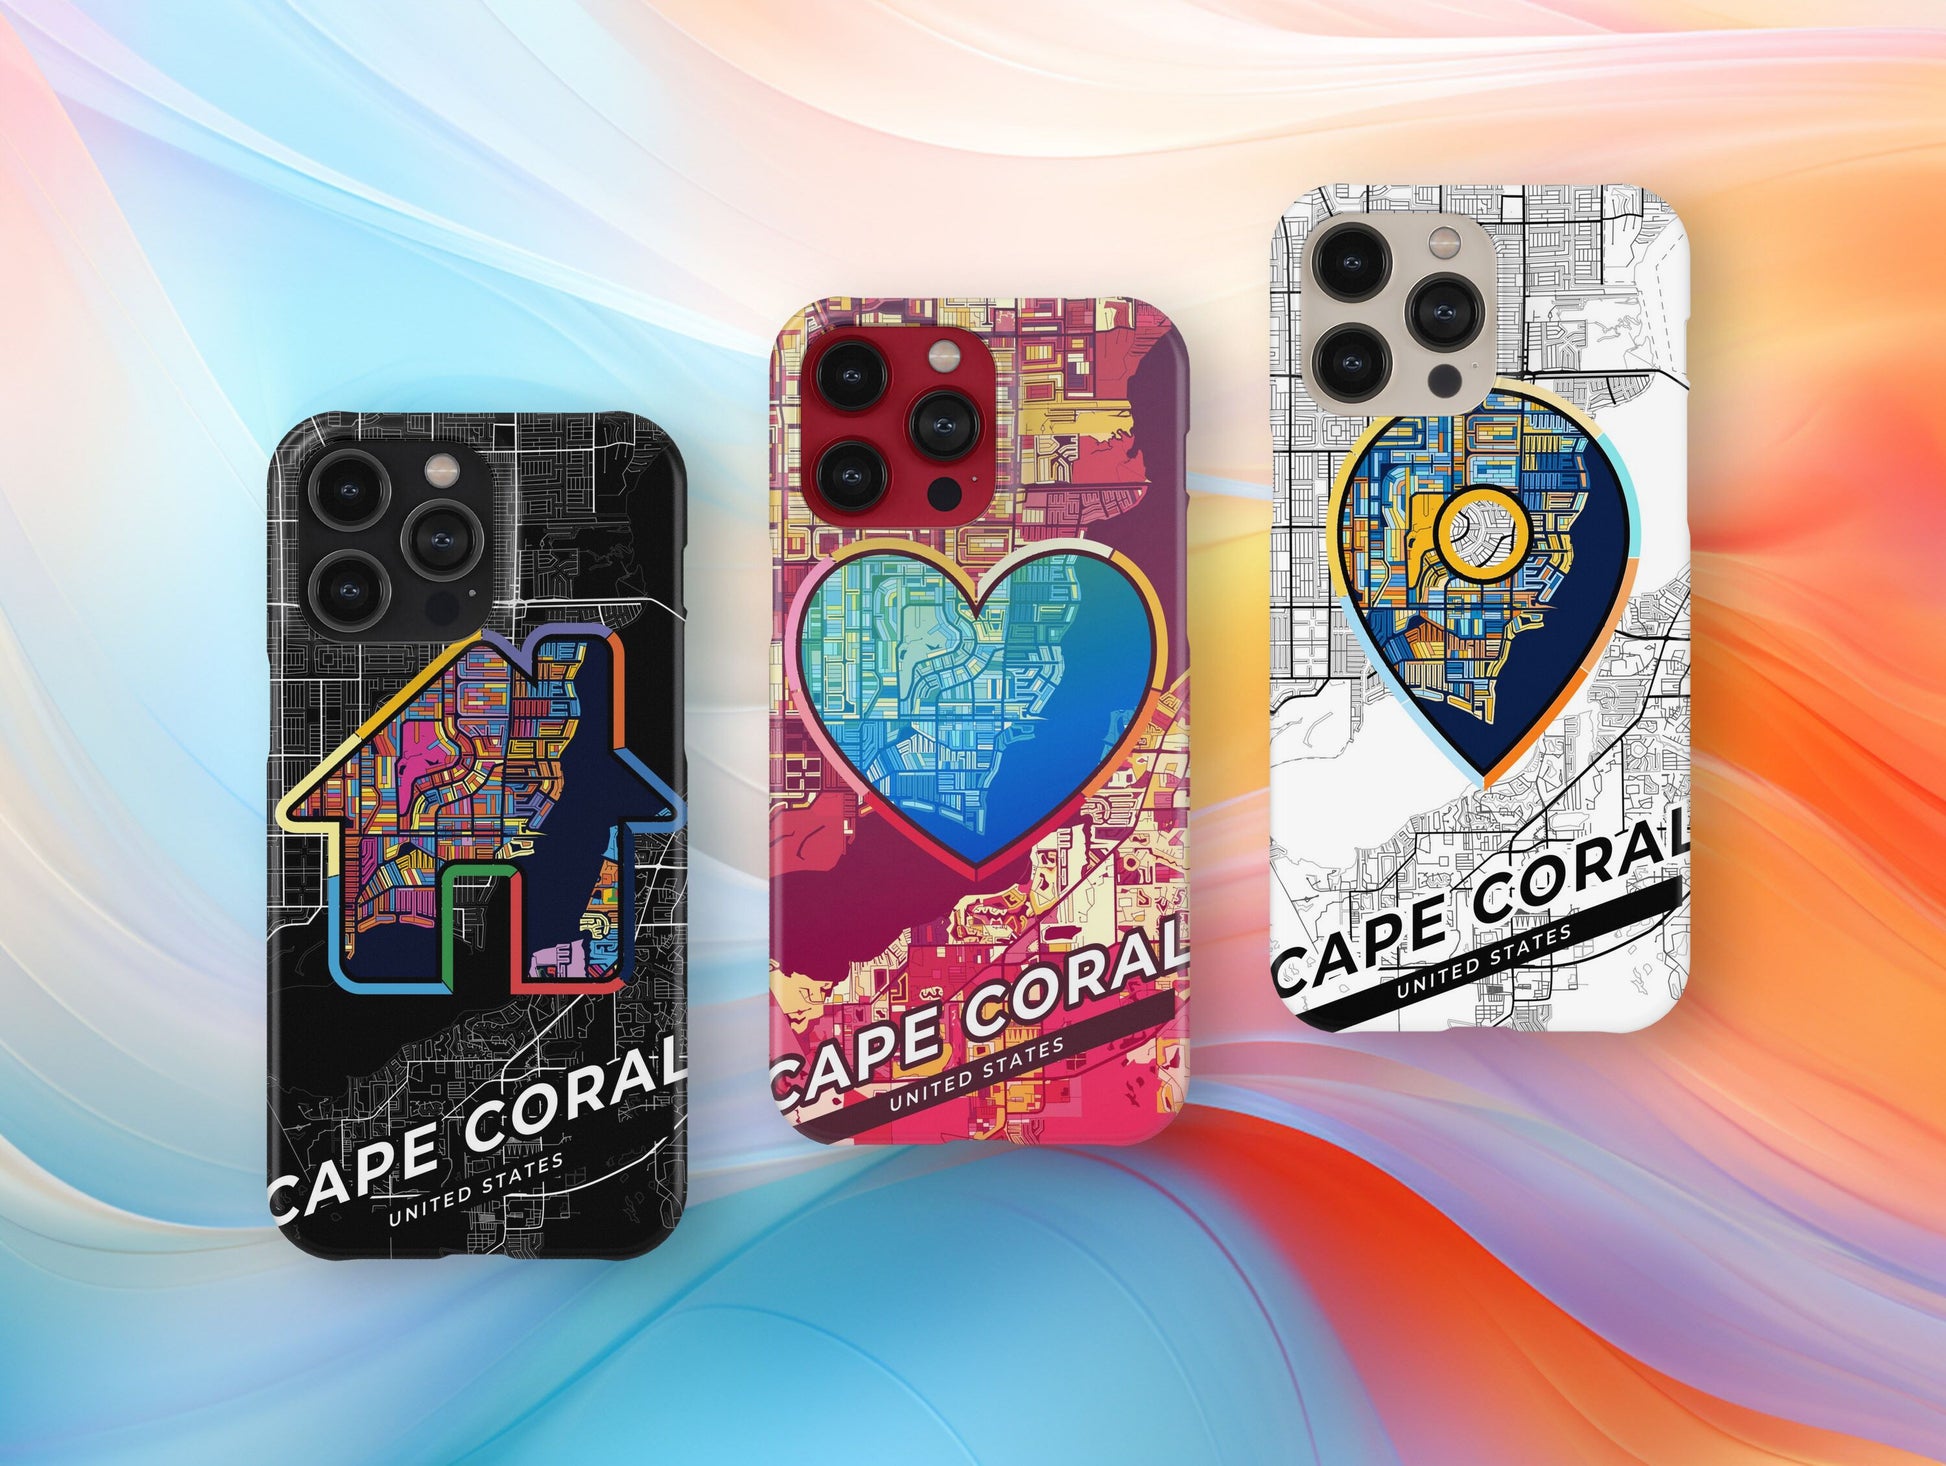 Cape Coral Florida slim phone case with colorful icon. Birthday, wedding or housewarming gift. Couple match cases.